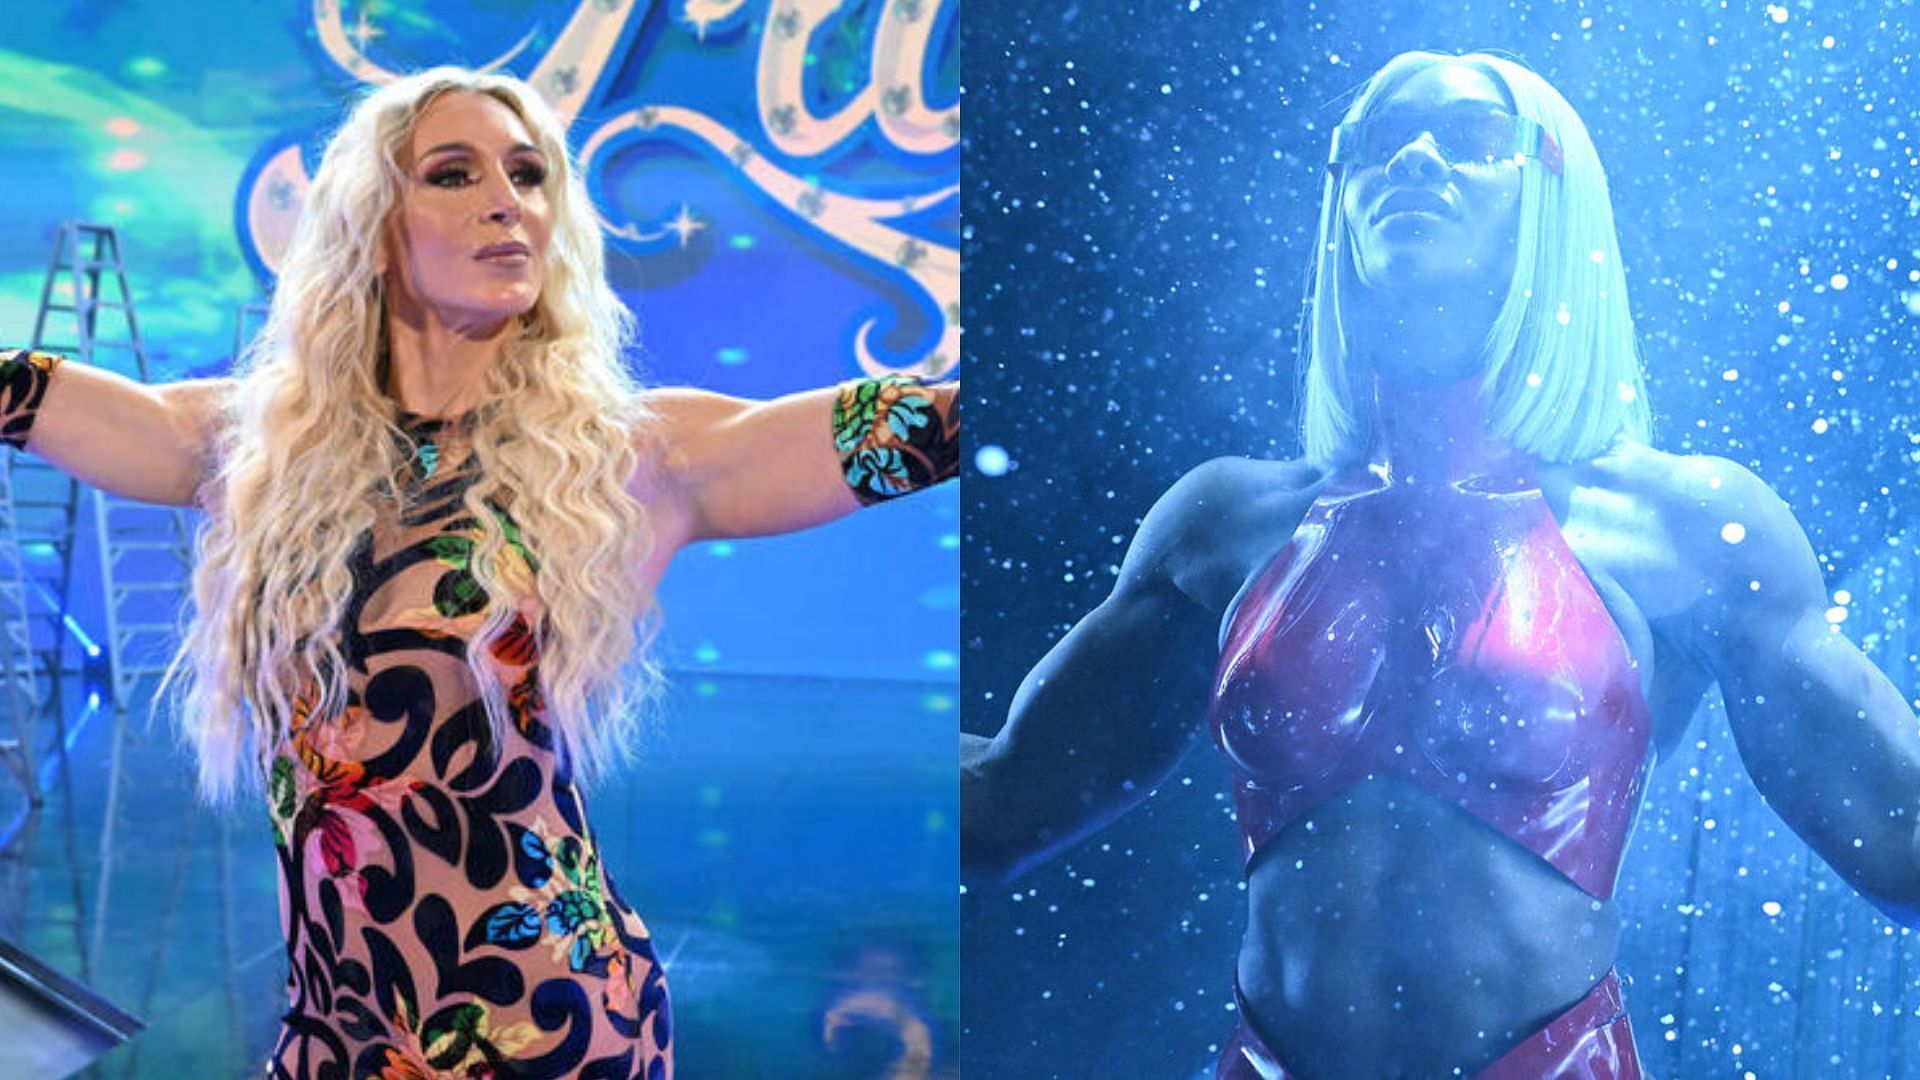 Charlotte Flair and Jade Cargill are both signed to SmackDown